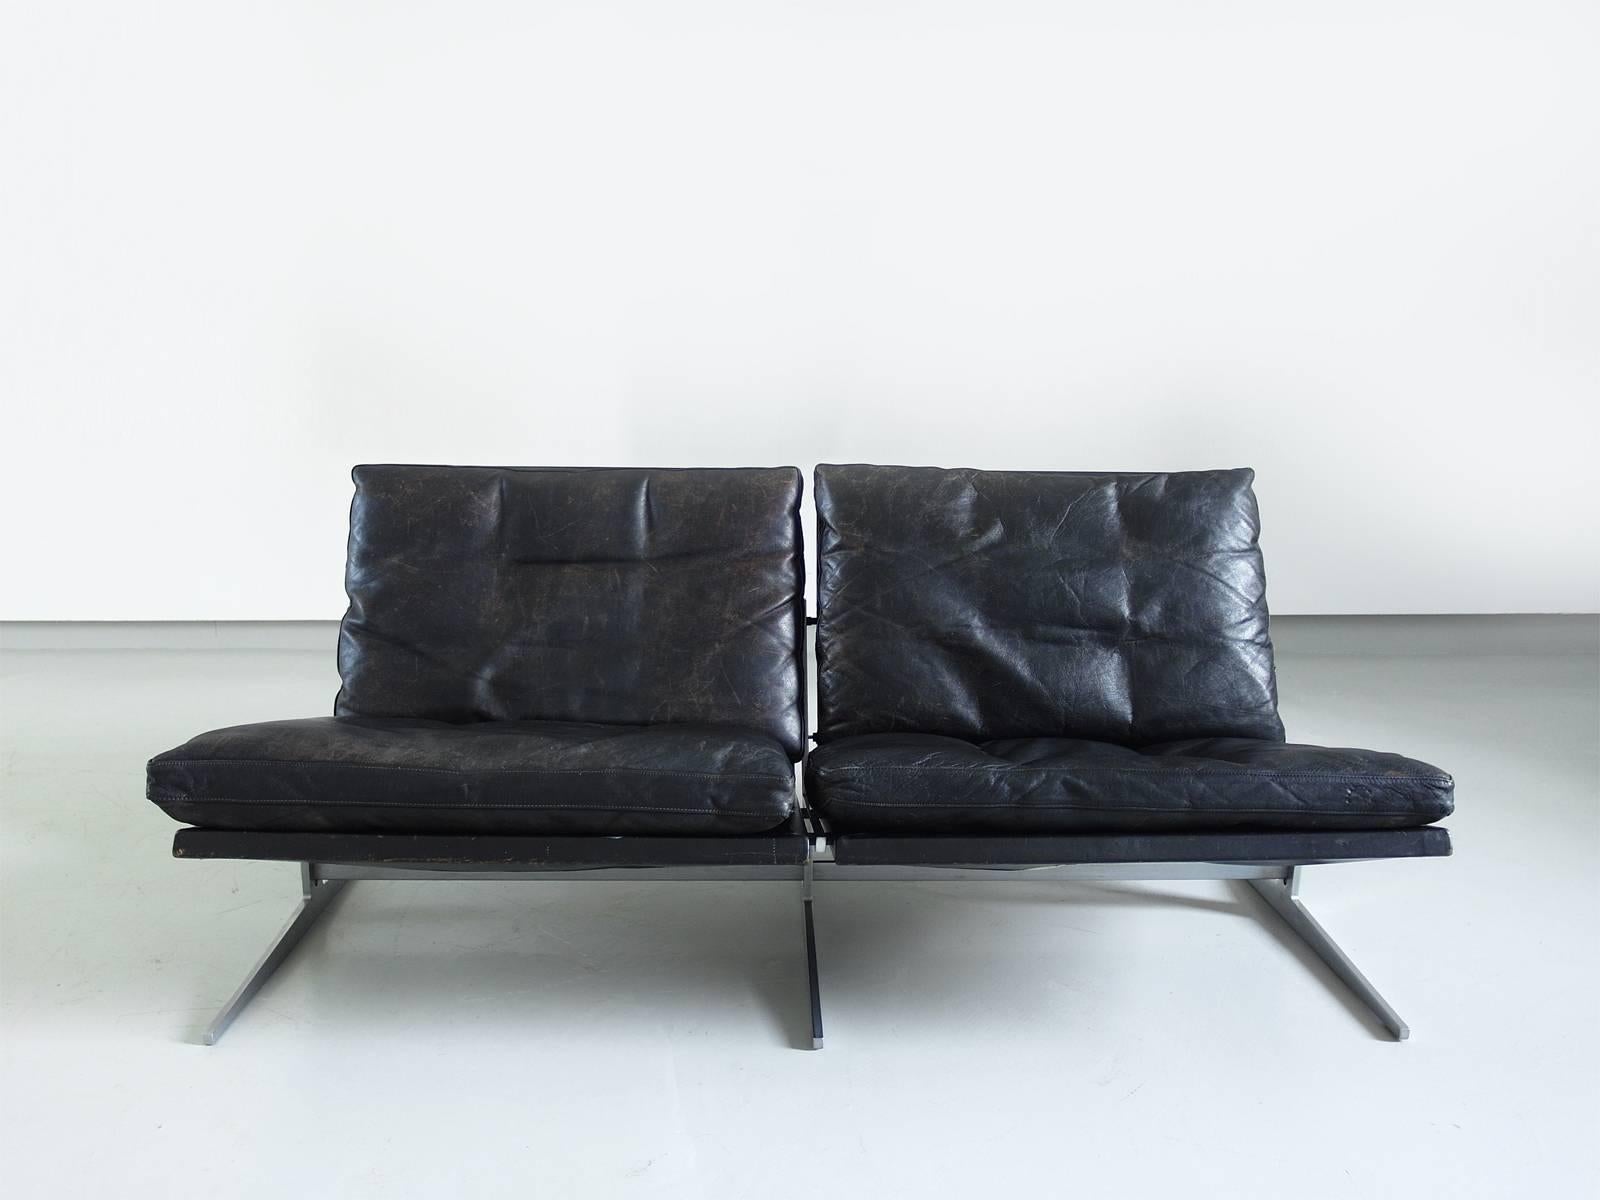 Brushed Fabricius and Kastholm Black Leather Two-Seat Sofa for Bo-Ex, Denmark, 1962